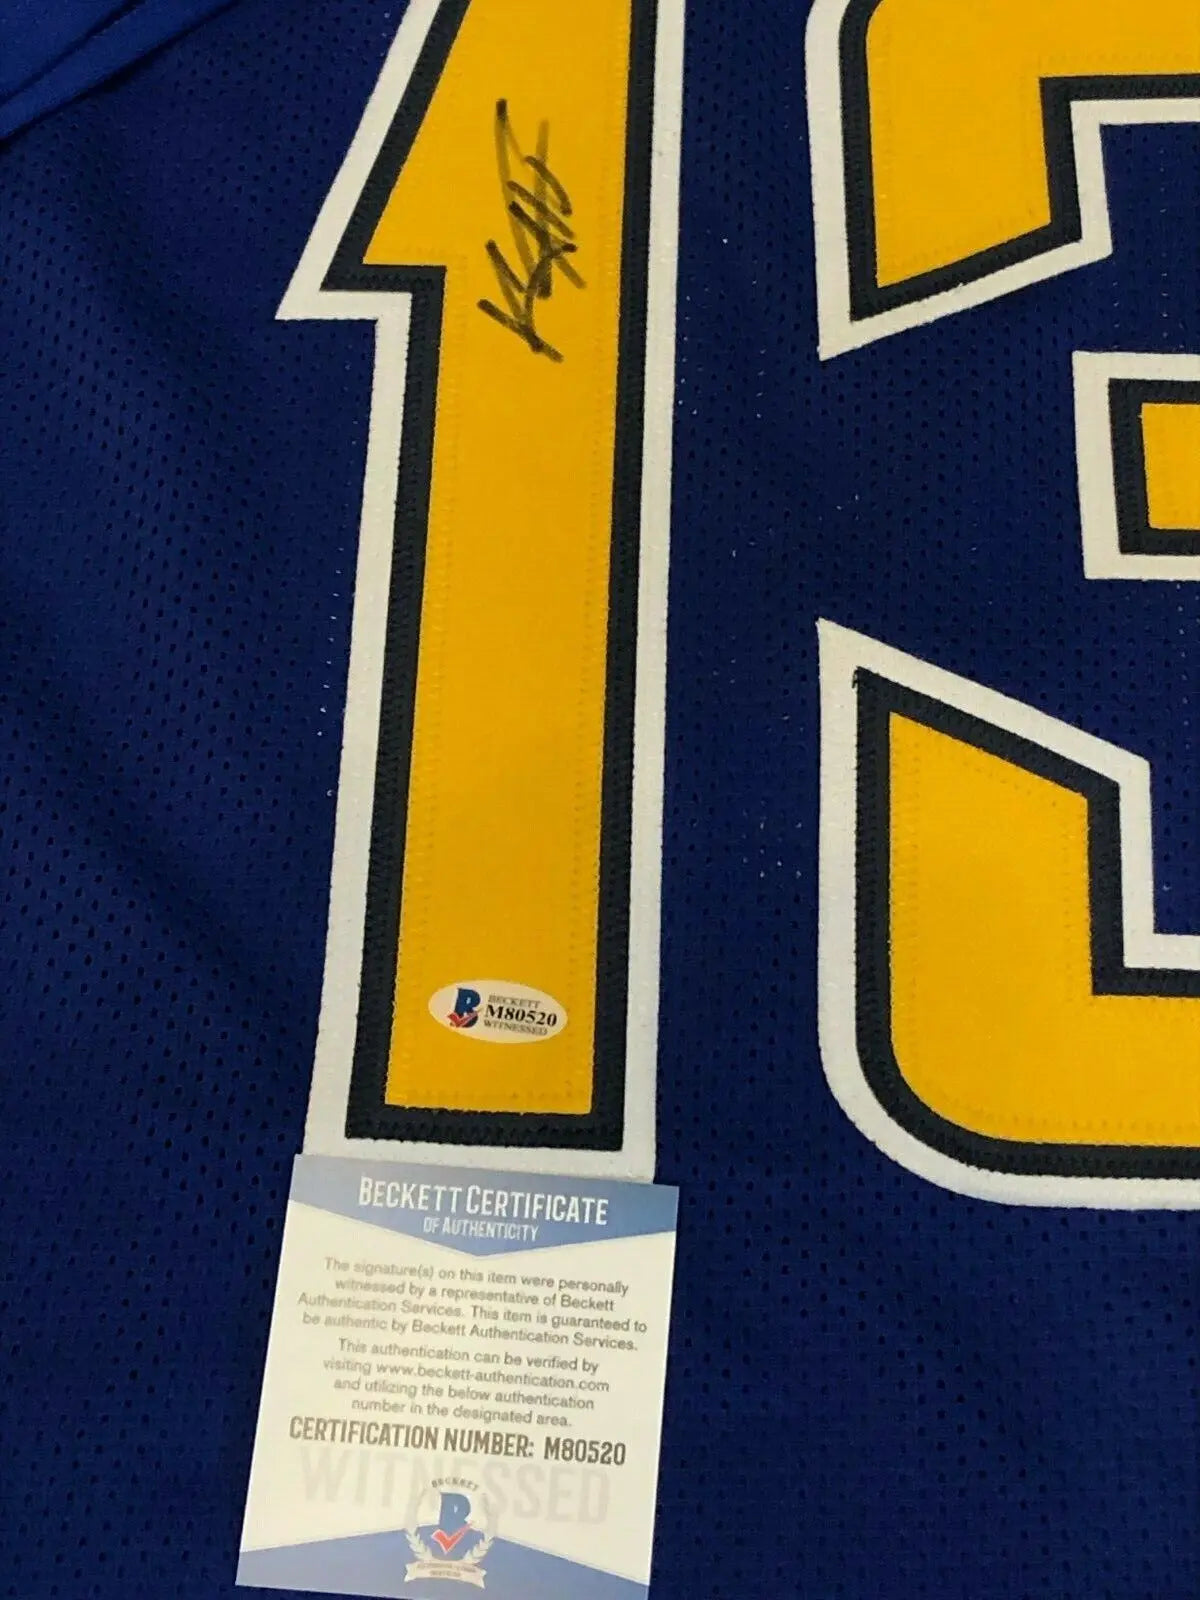 Keenan Allen Los Angeles Chargers Game-Used #13 Navy Jersey vs. Seattle  Seahawks on October 23 2022